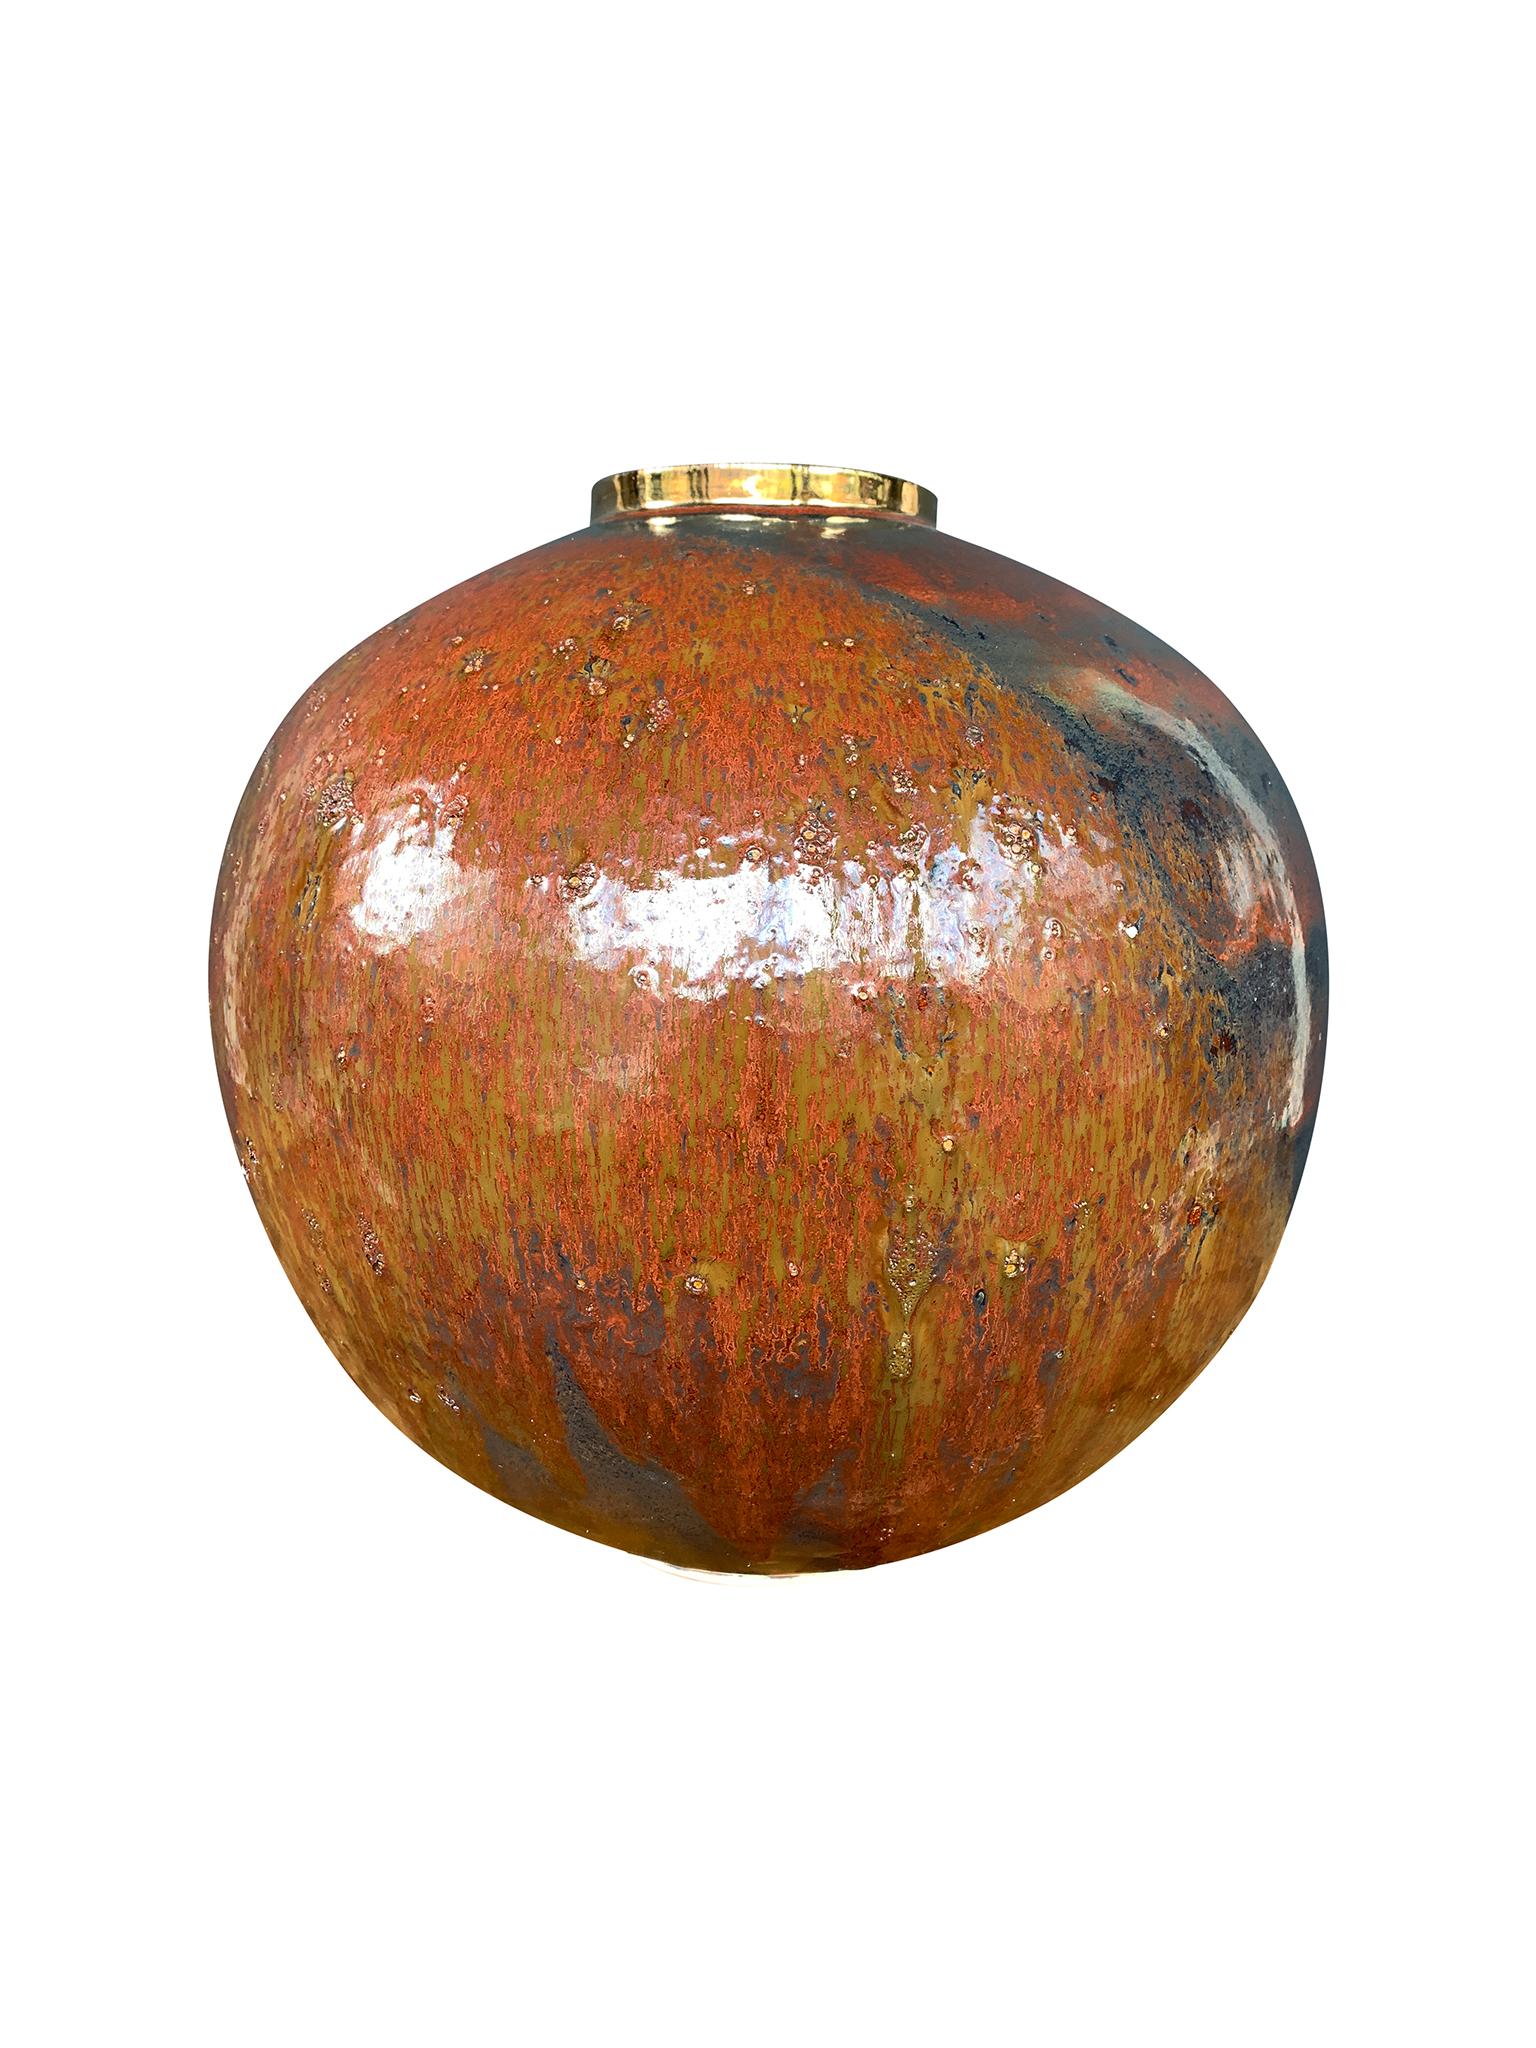 From Thom Lussier's Golden Patina Collection - a series of ceramic vessels with rich, colorful surfaces that evoke both terrestrial and otherworldly terrain. This vessel is spherical in form with a lipped opening rimmed in a gold finish.

White